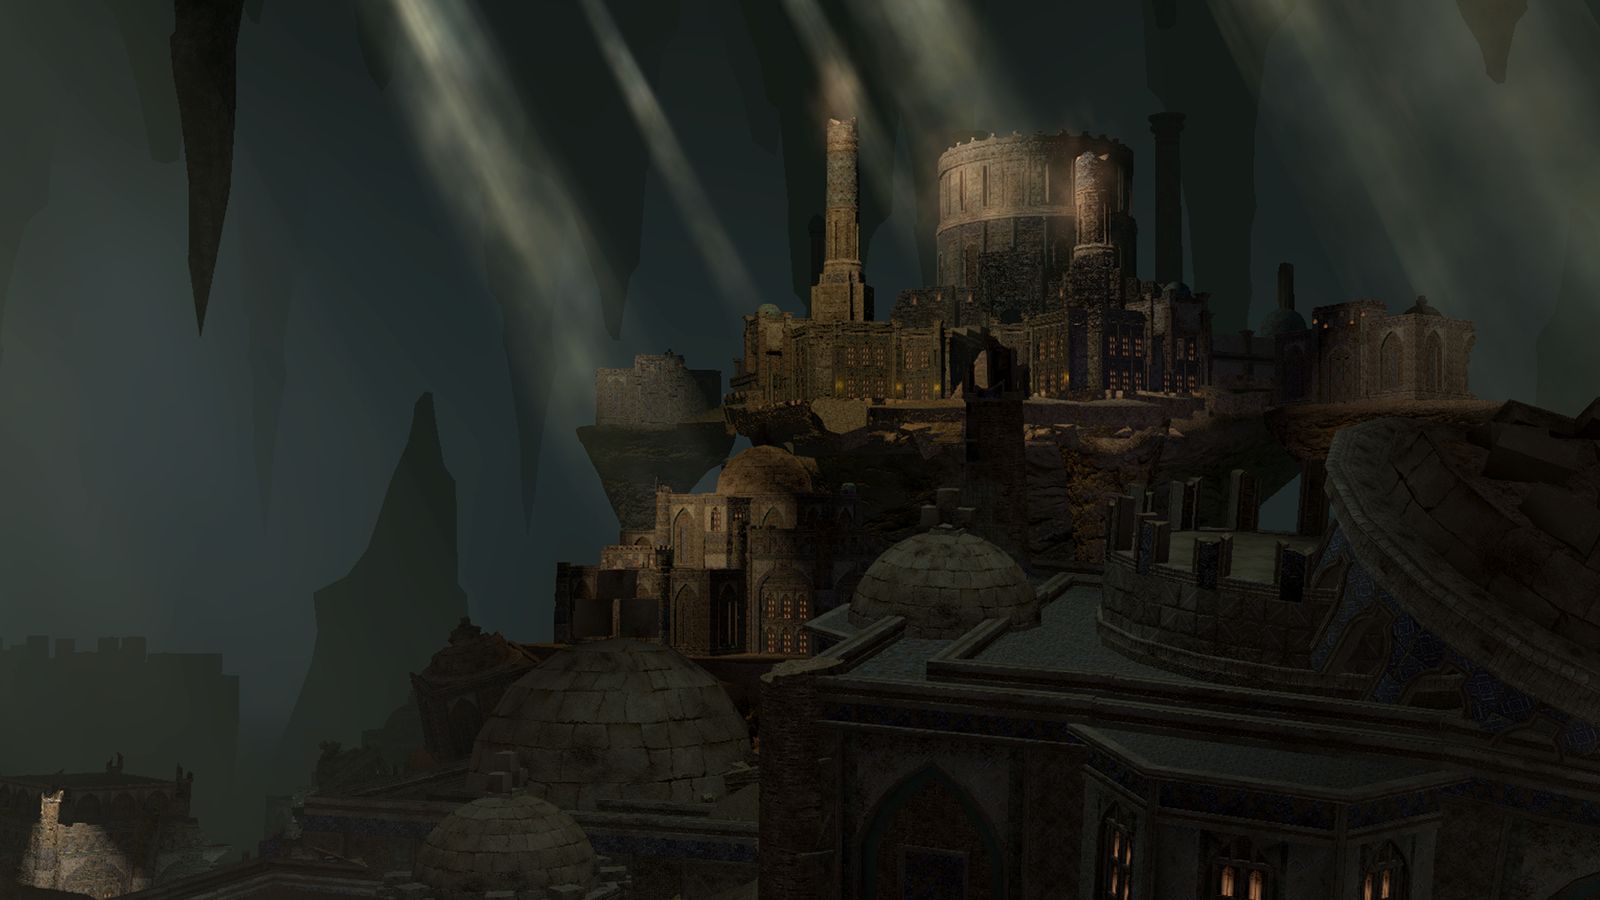 An image of Delubrum Reginae, a duty involved in the Shadowbringers' relic weapon grind. It is a vast, underground castle with massive stalagmites and stalactites in the distance.